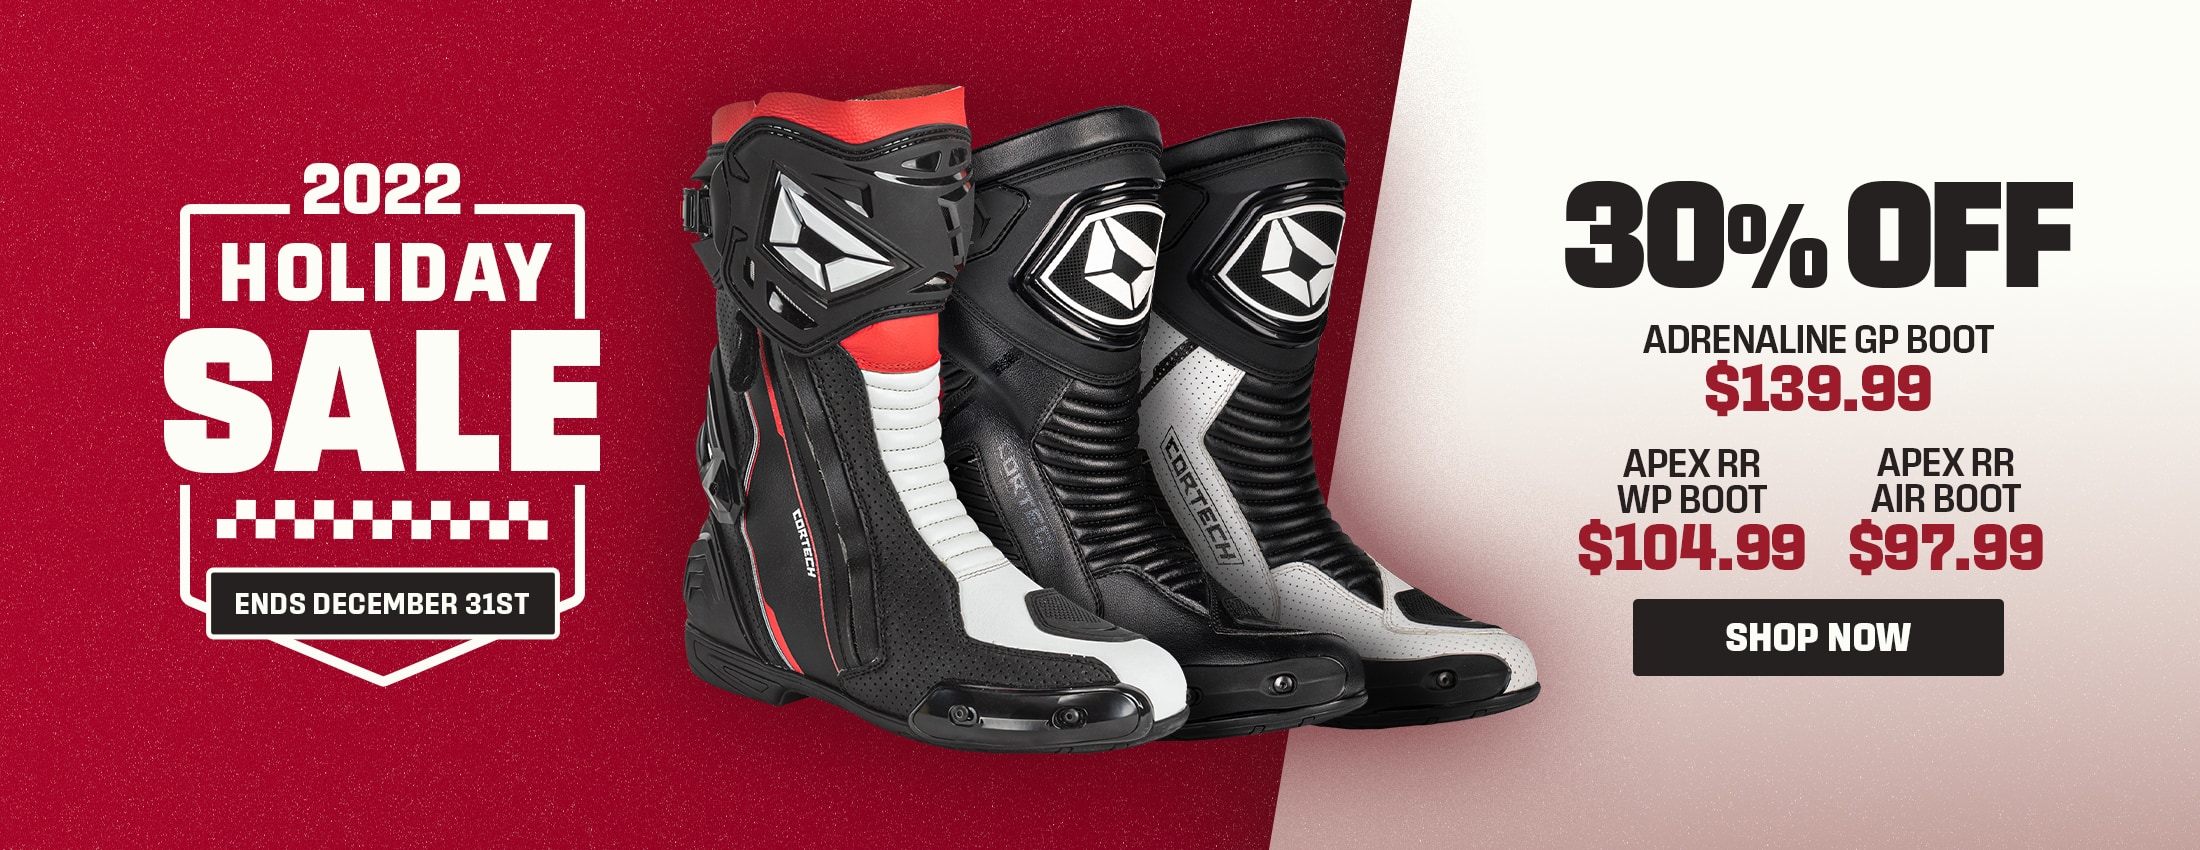 Cortech Boots 2022 Holiday Sale